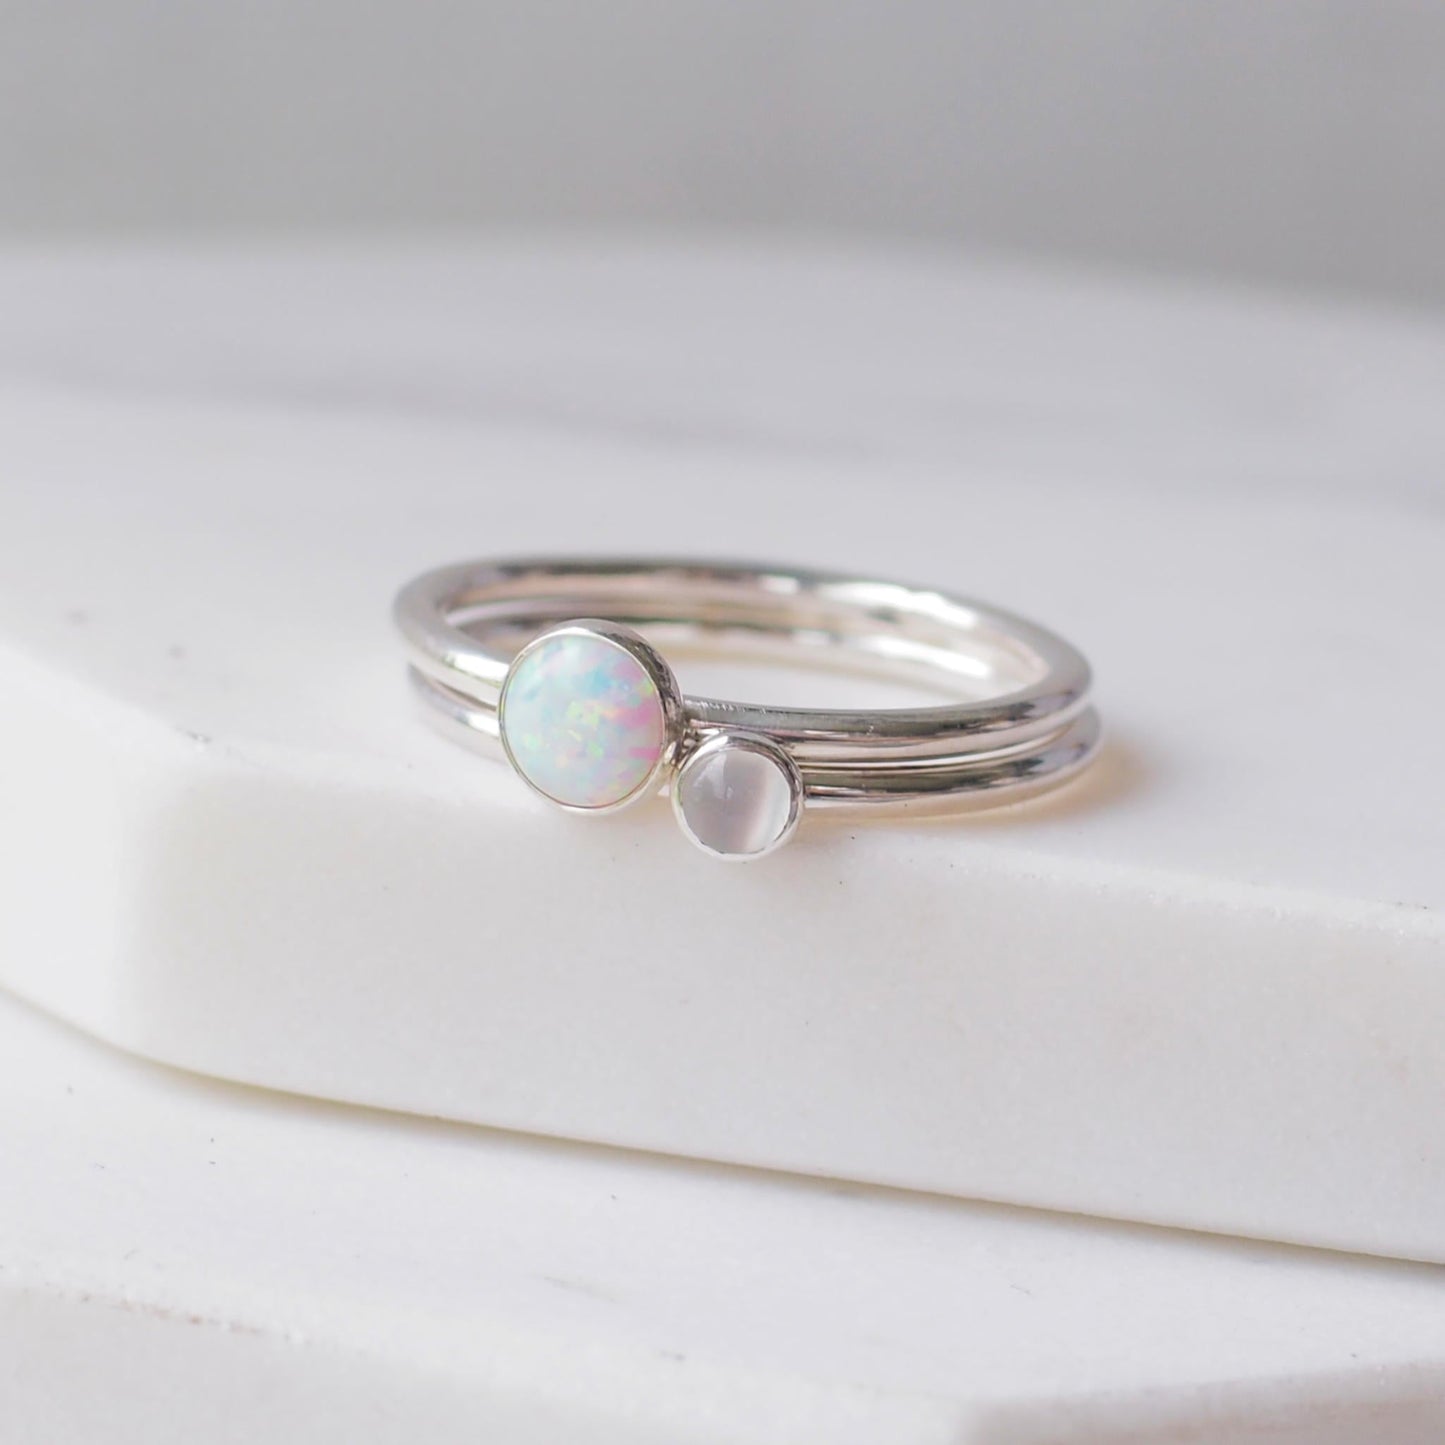 Two silver rings with lal Opal and Moonstone gemstones. Birthstones for June and October. Handmade to your ring size by maram jewellery in Scotland , UK